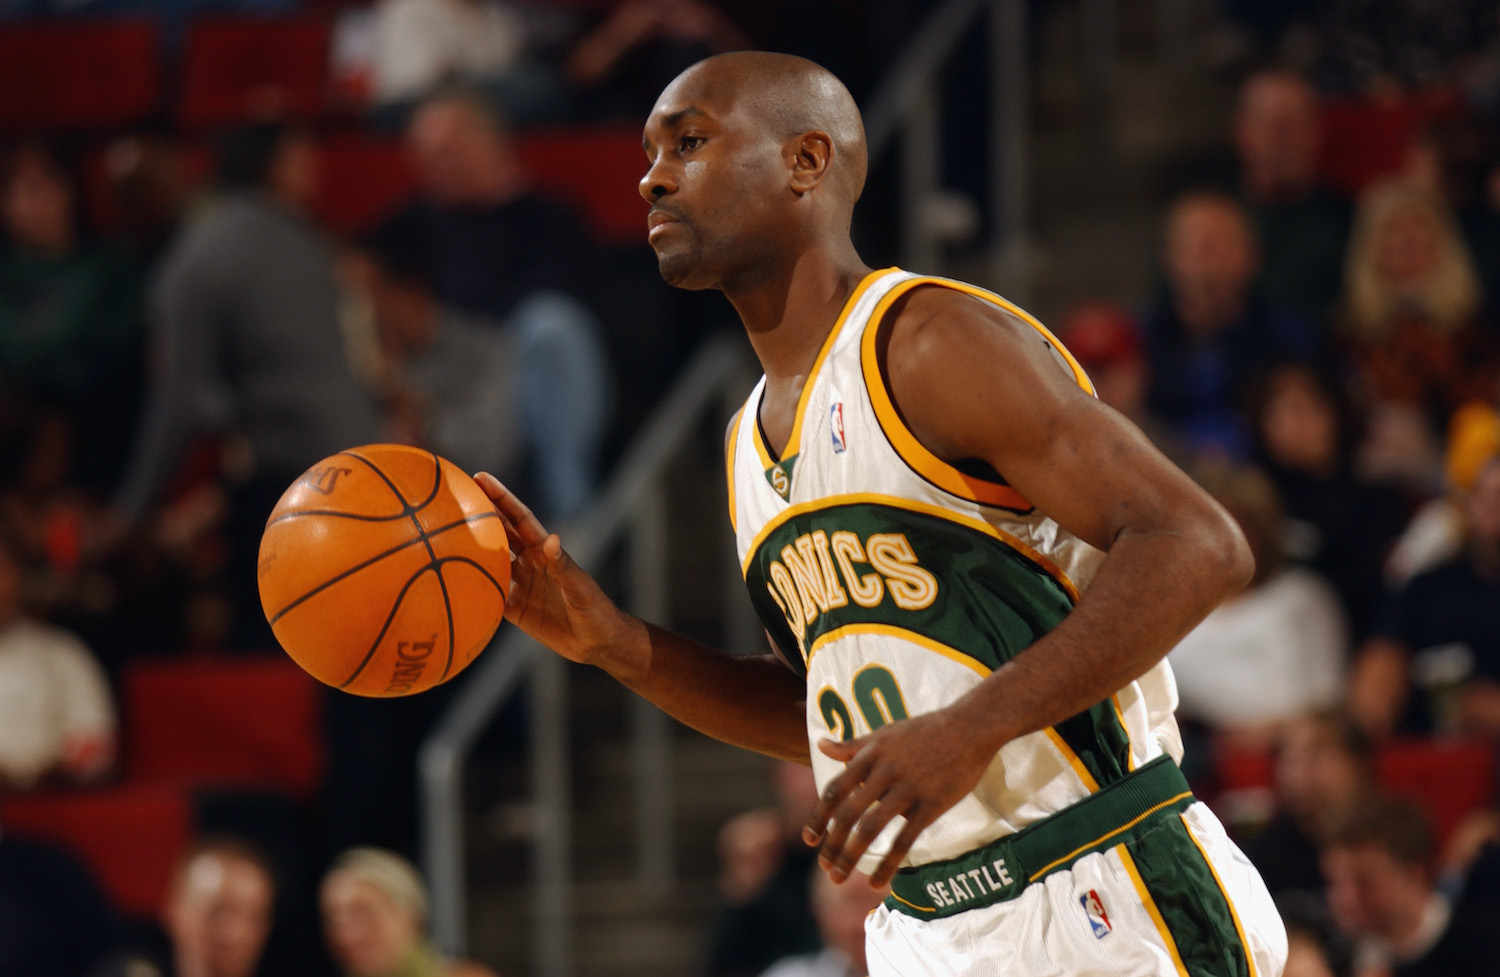 Gary Payton Won 1 Championship Ring as an NBA Player but Used His $50 Million Net Worth to Buy More